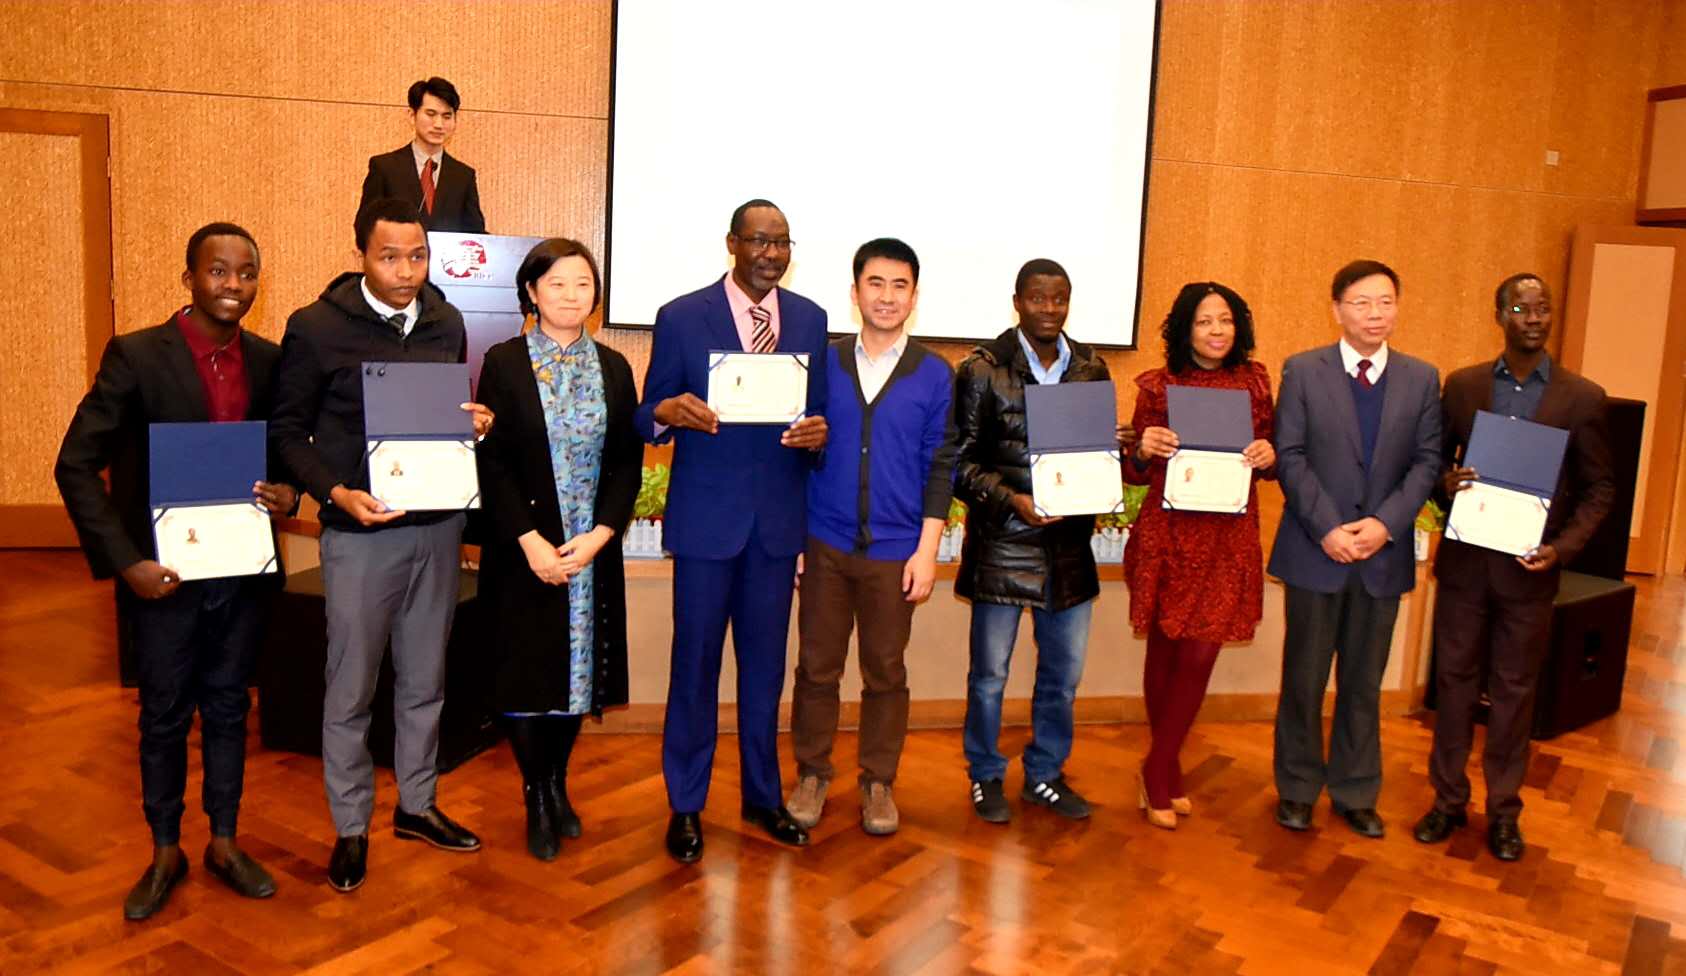 Photos of our graduation Ceremony at Beijing International Chinese College BICC in Beijing. 10th December 2019.